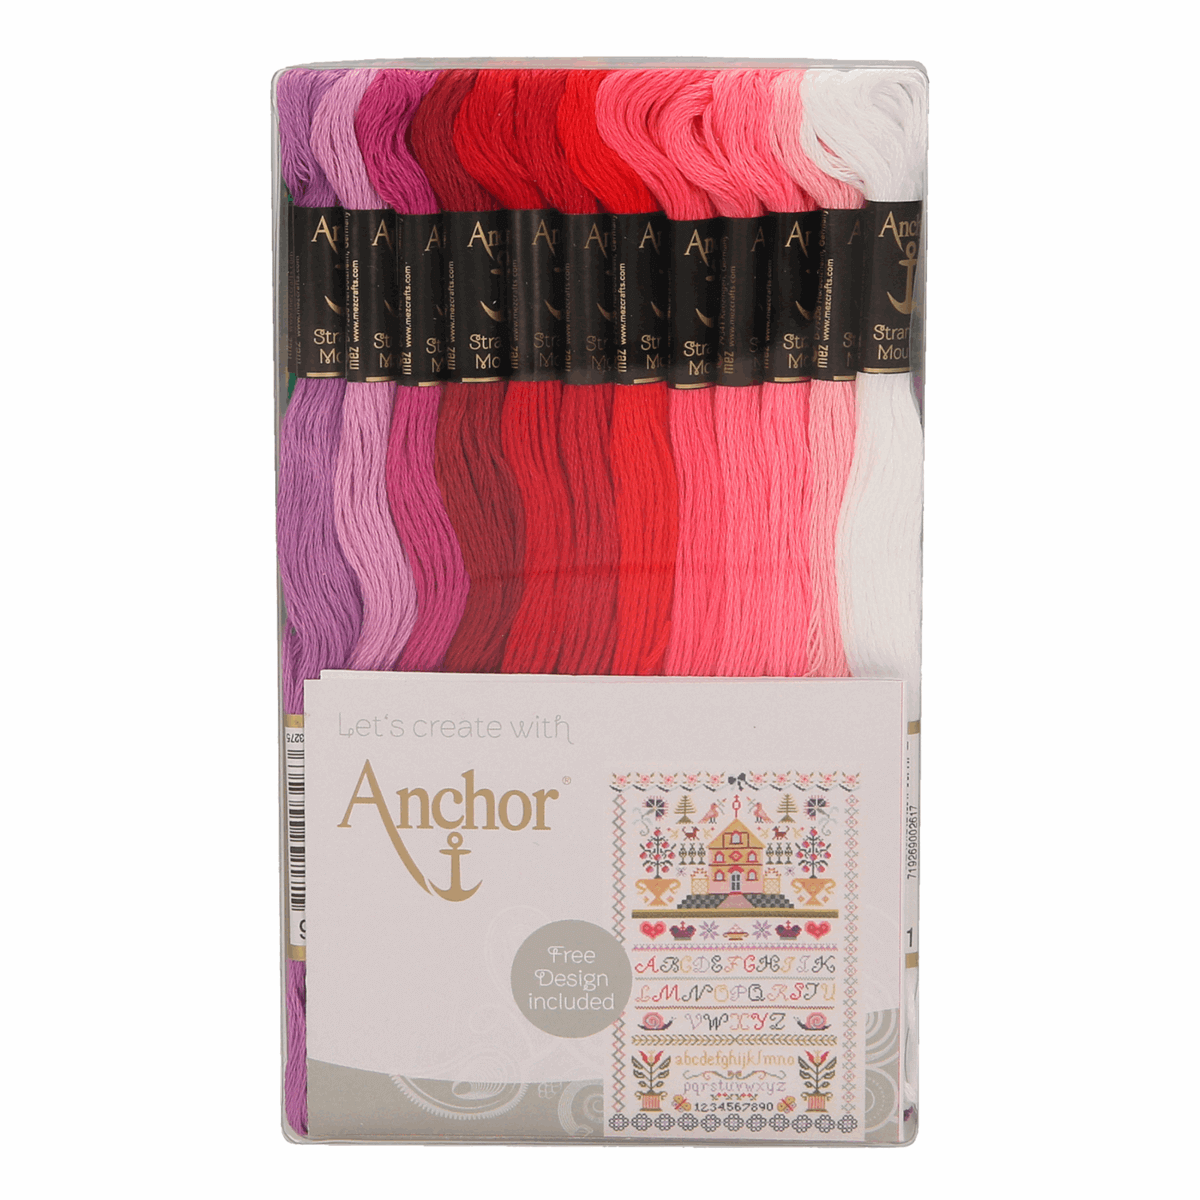 Anchor Cross Stitch/Embroidery Stranded Cotton: Club Assortment: 48 Skeins